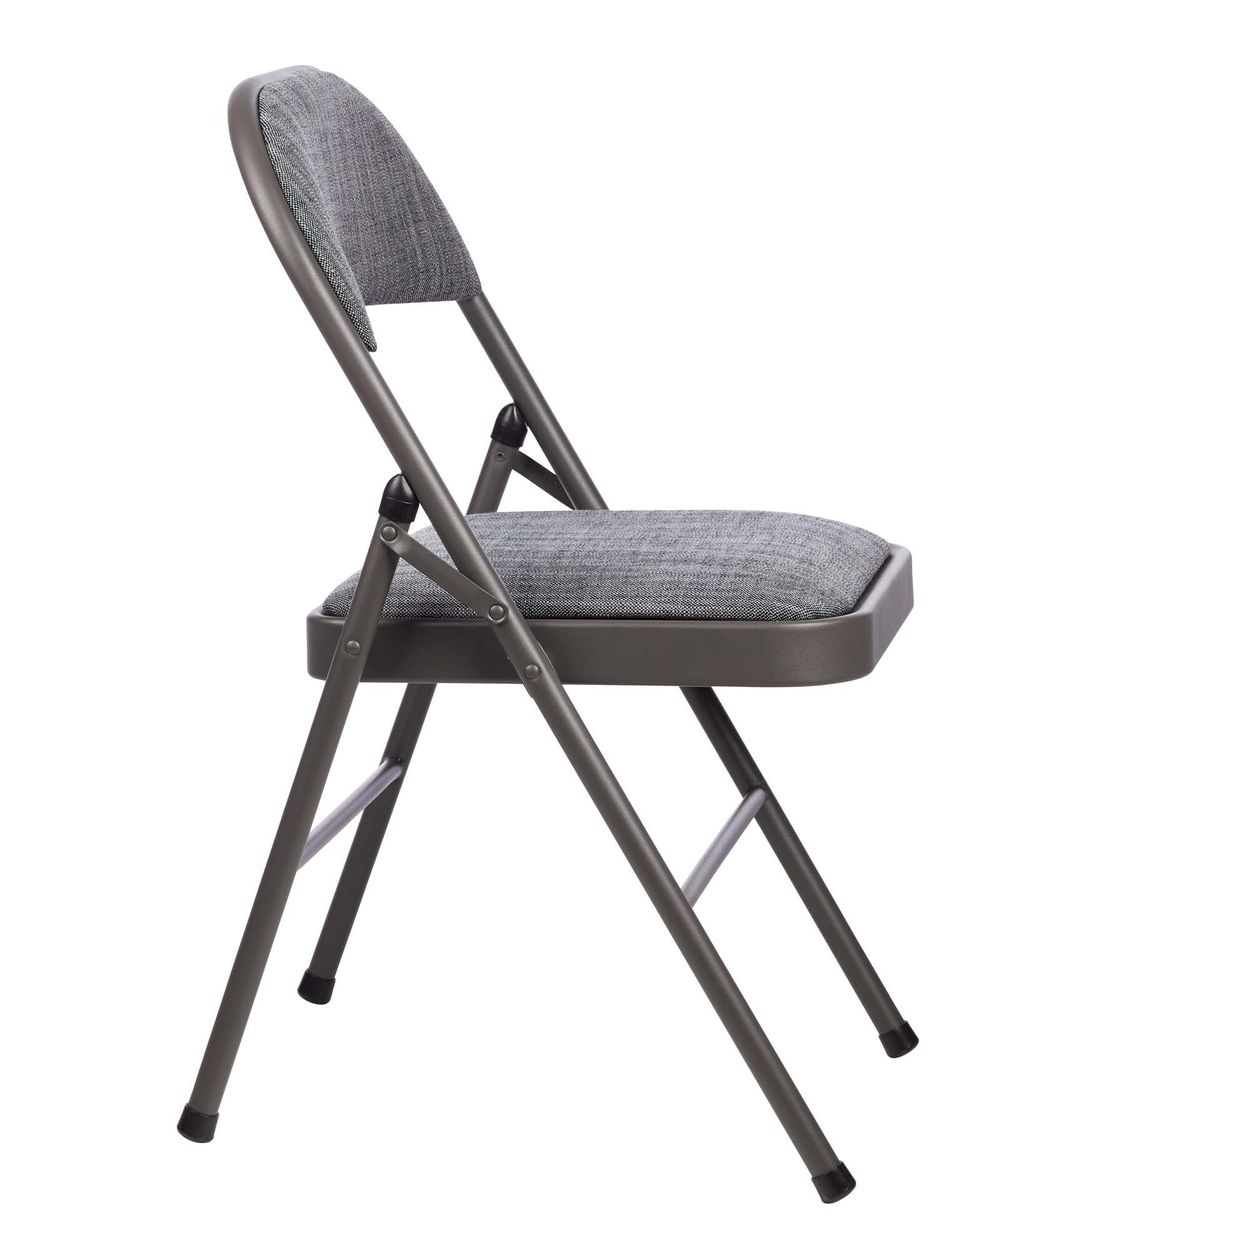 Maxchief Upholstered Padded Folding Chair